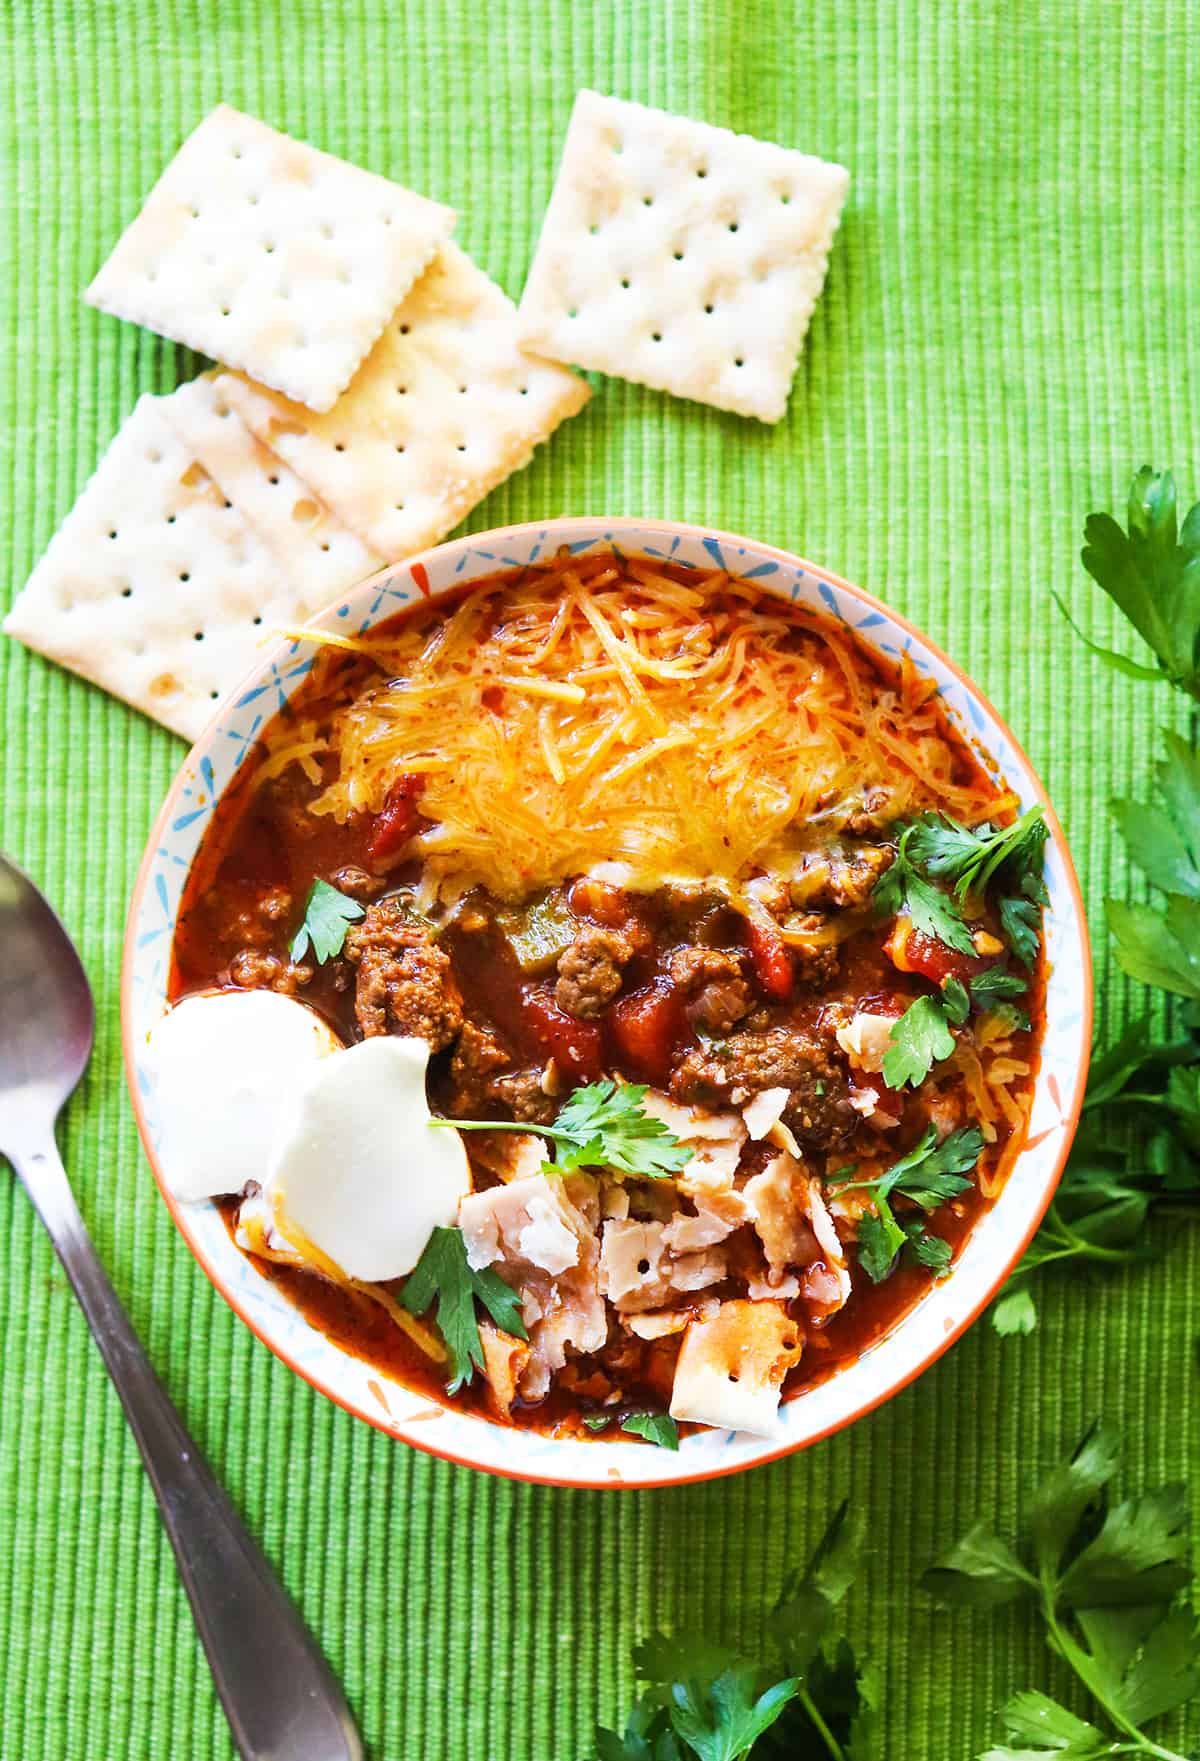 Looking down into a heaping bowl of chili without beans topped with sour cream, crackers and parsley.